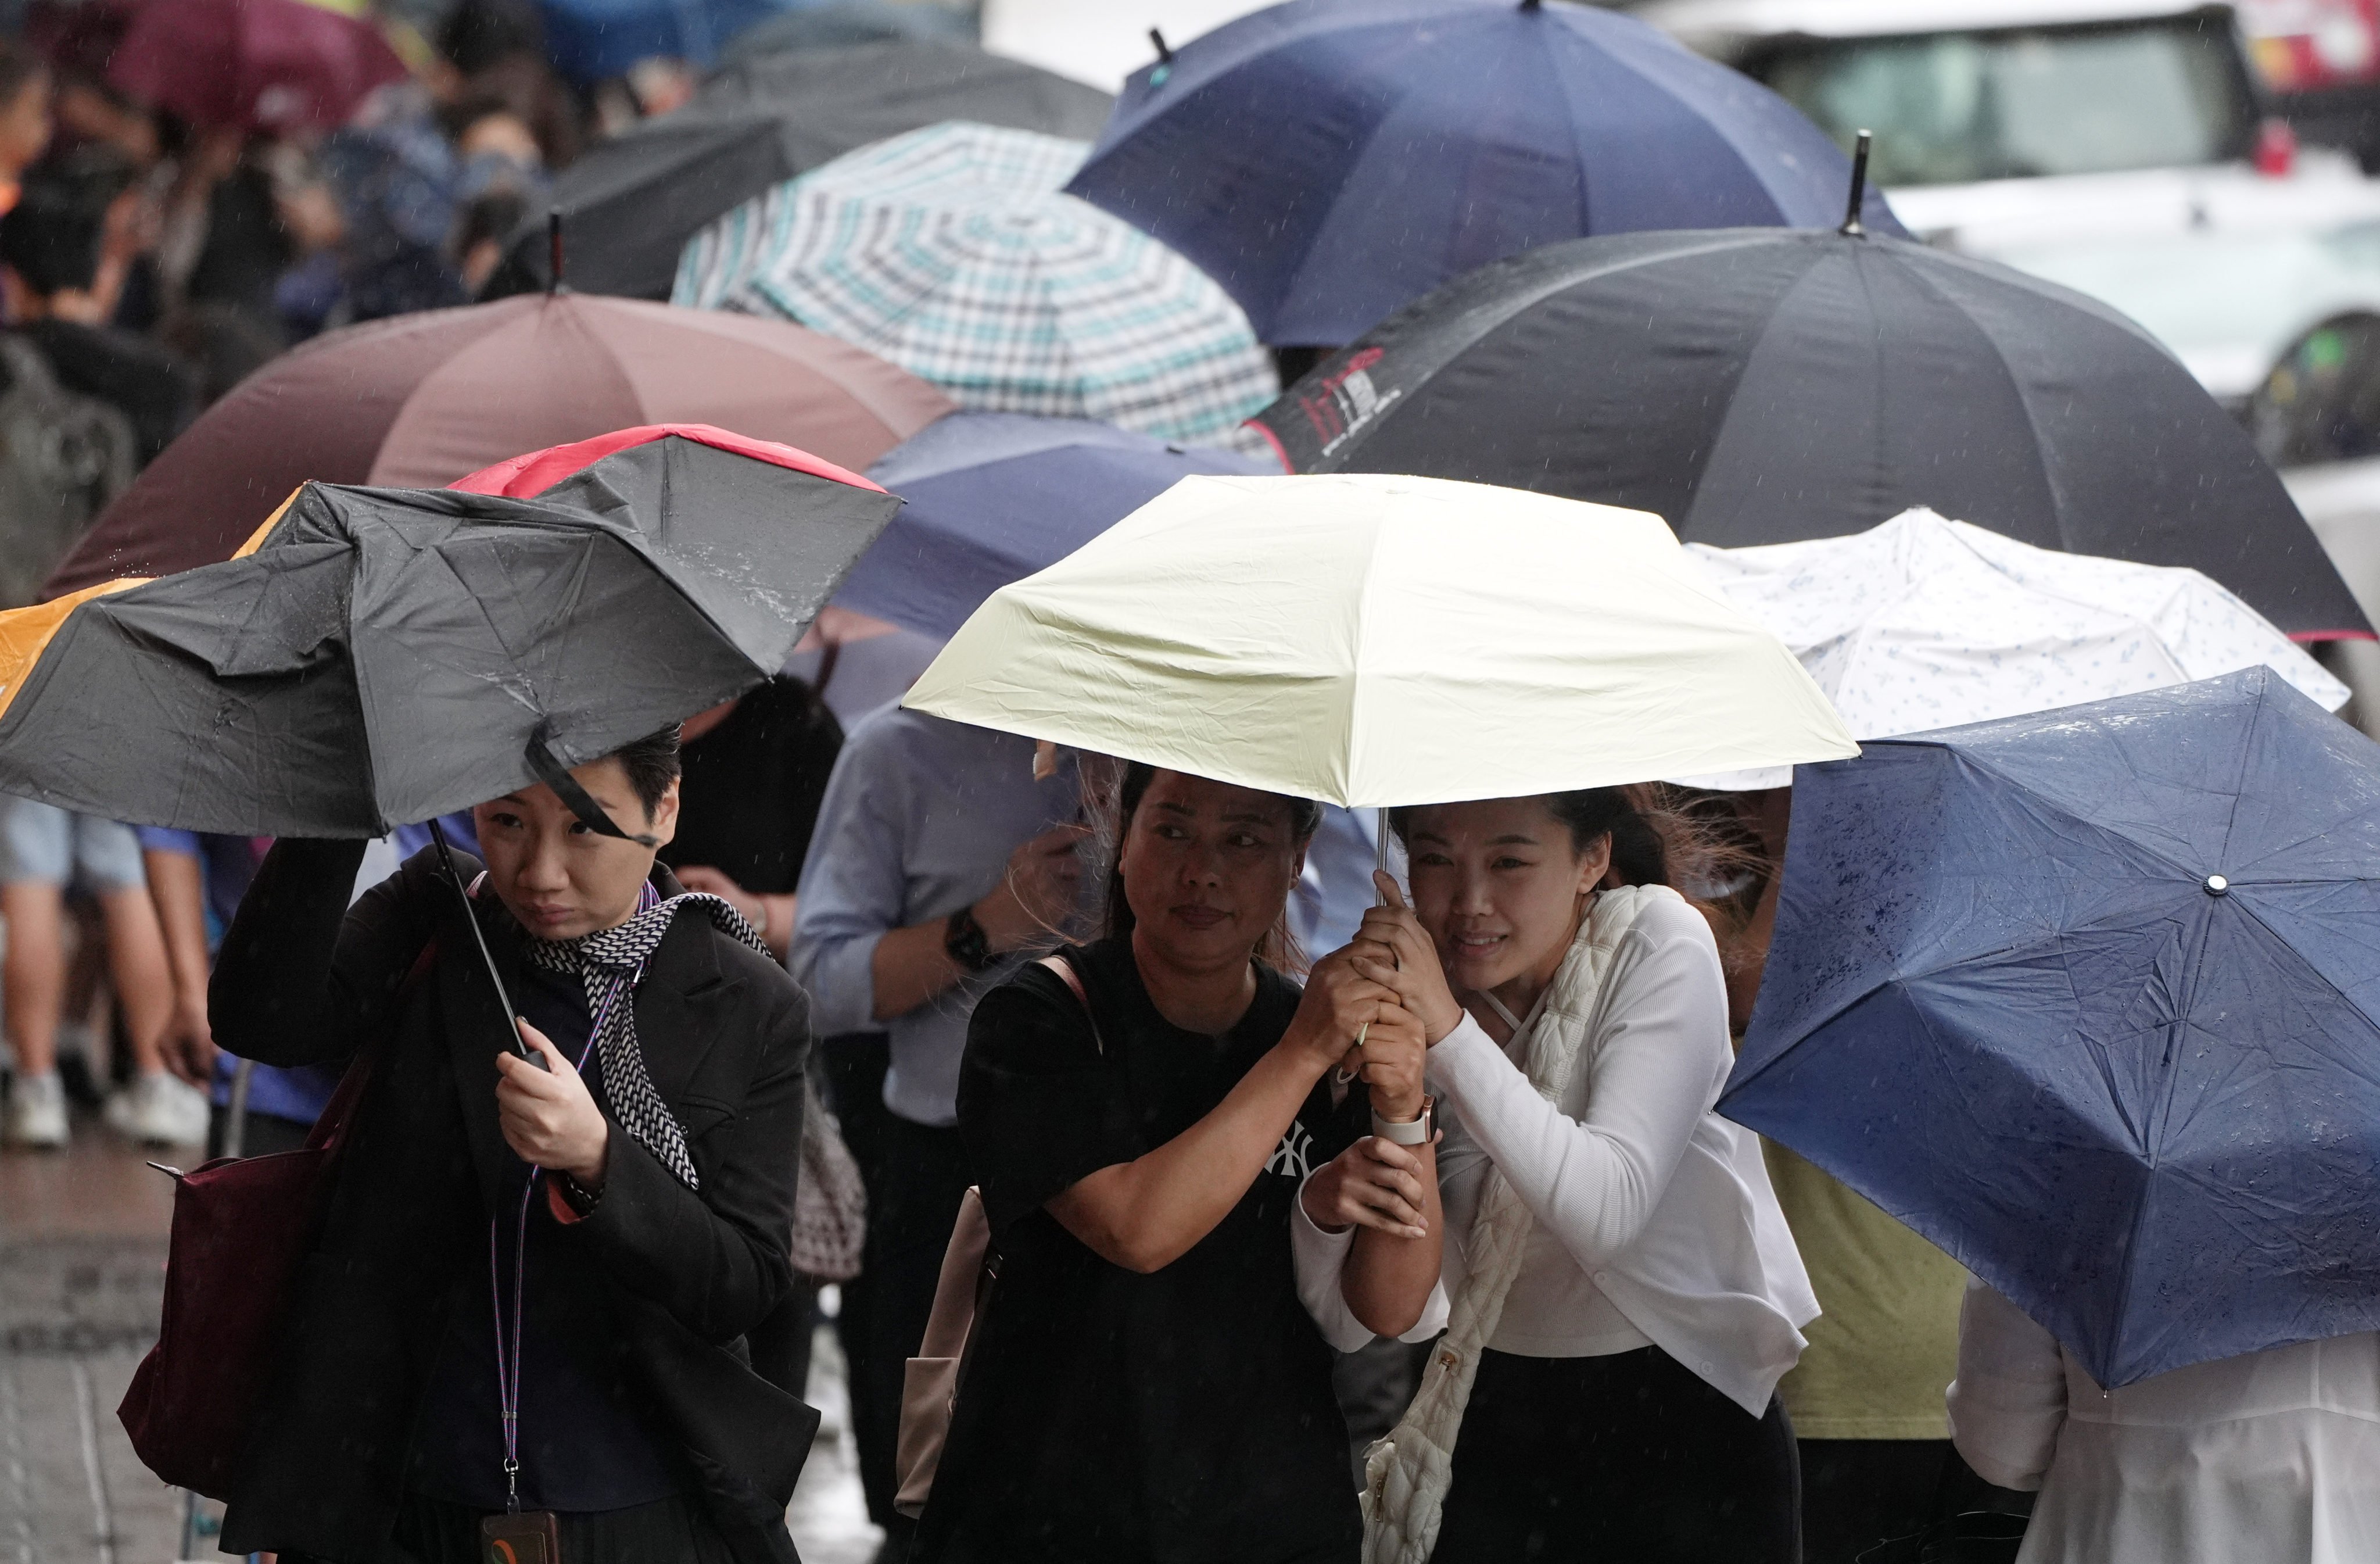 Hong Kong has contended with a spate of unstable weather in recent weeks. Photo: Eugene Lee